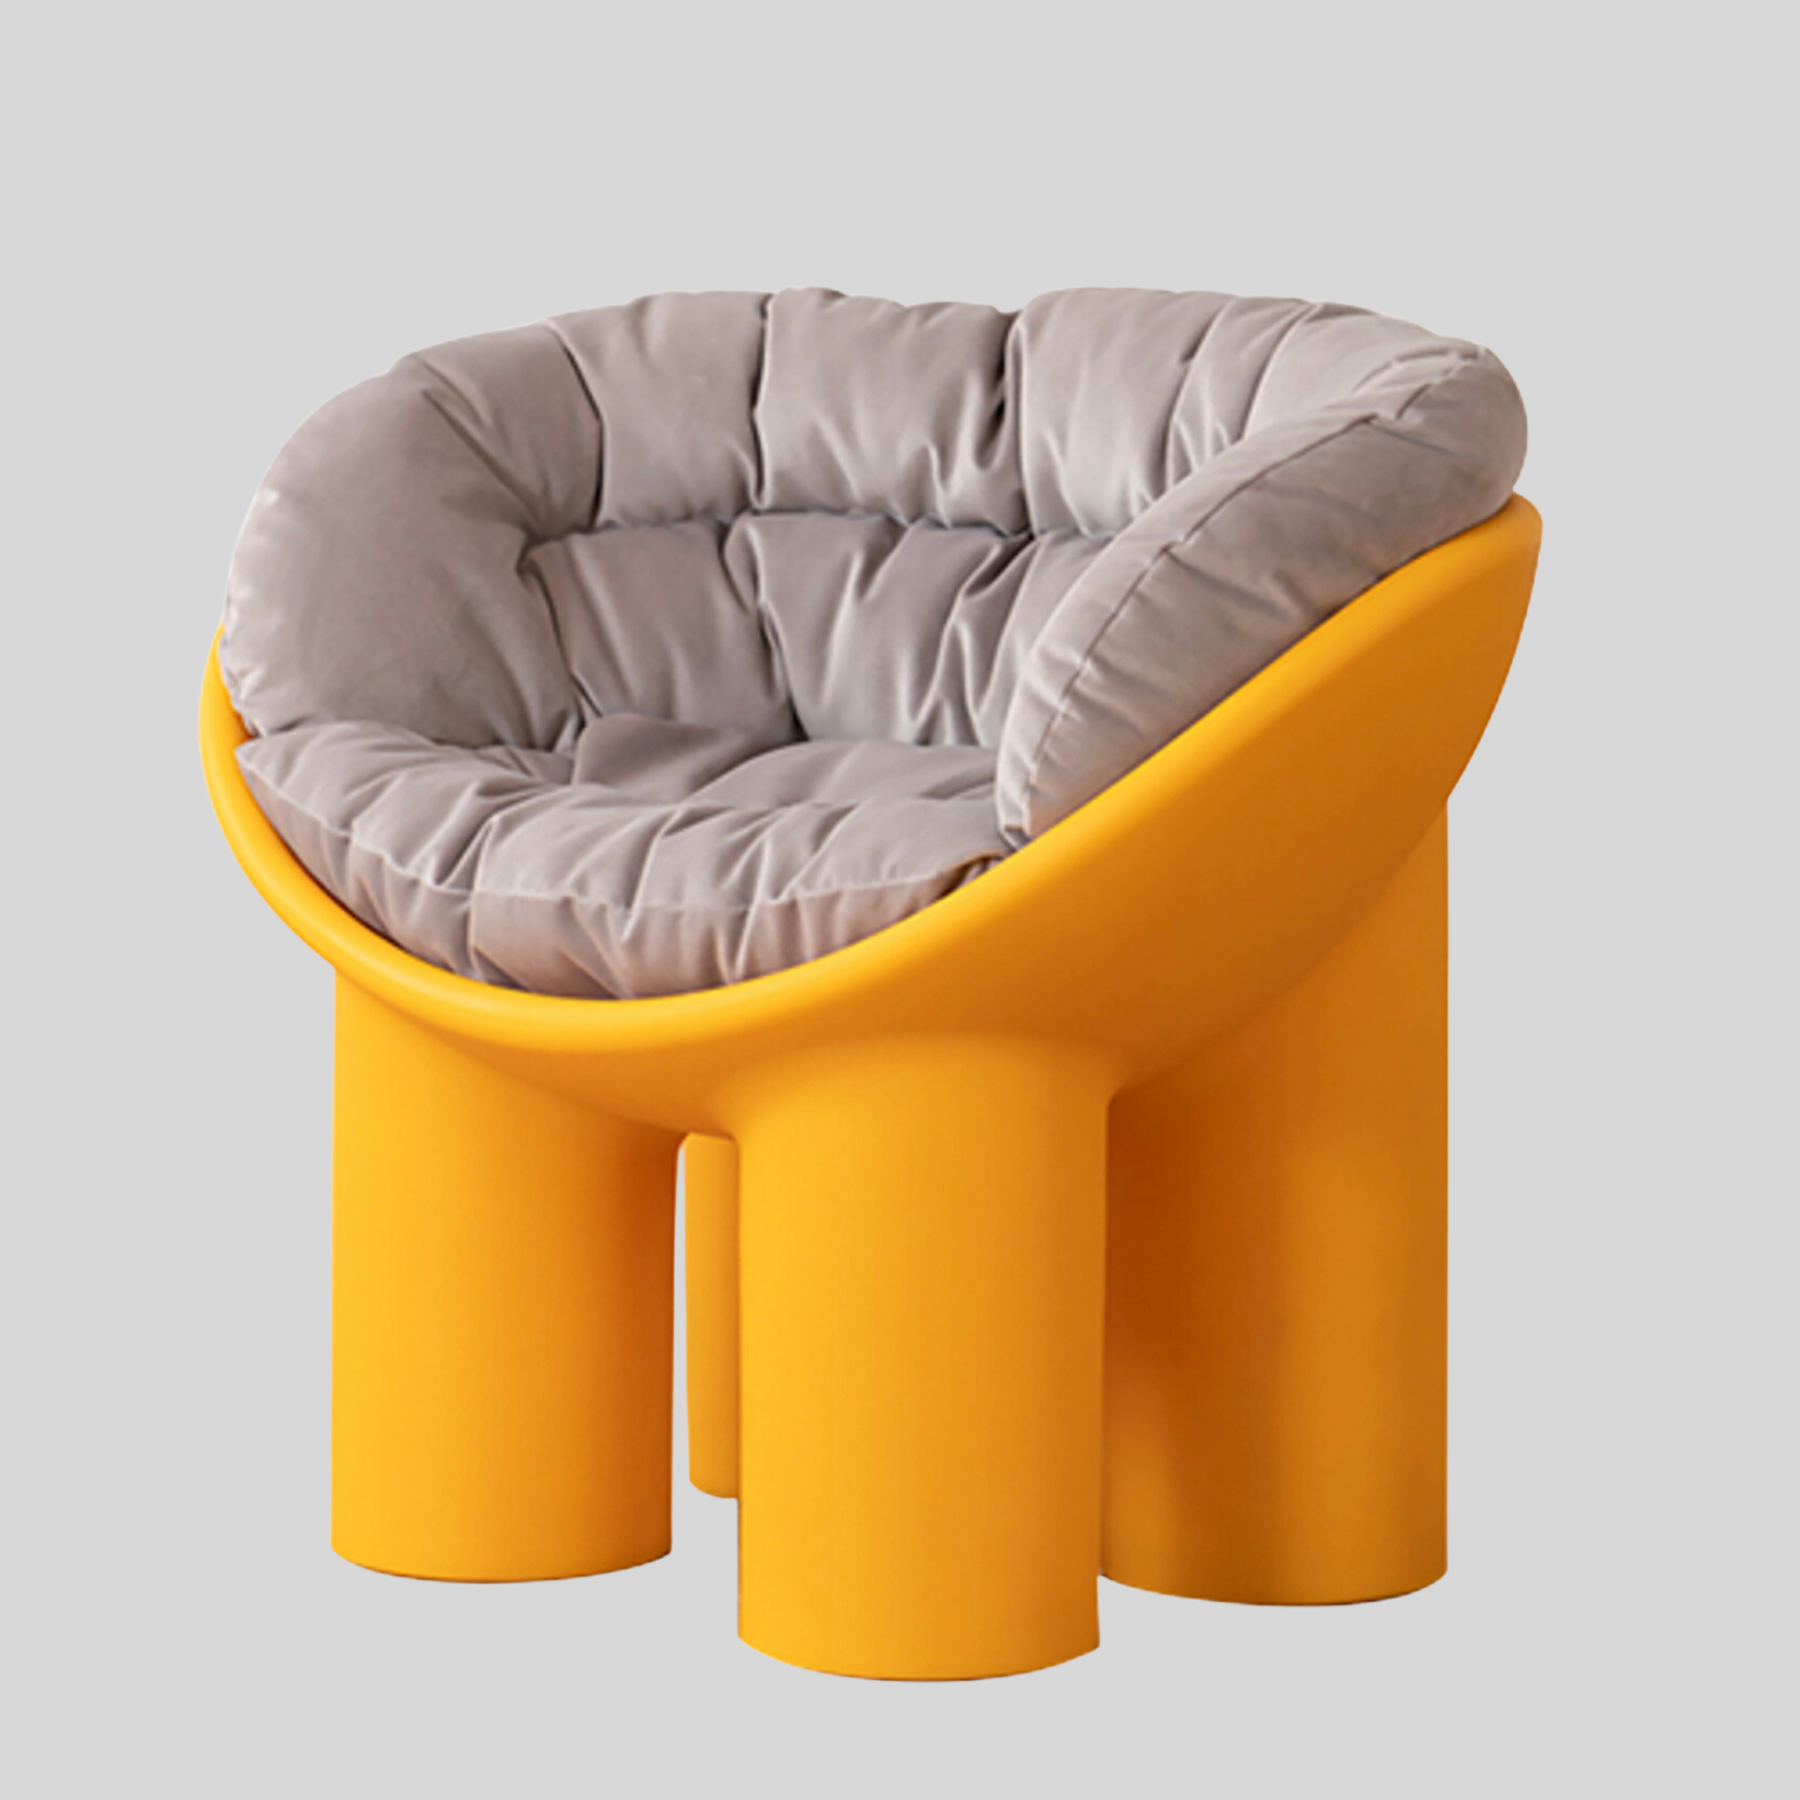 Riala Roly Poly Chair - Yellow